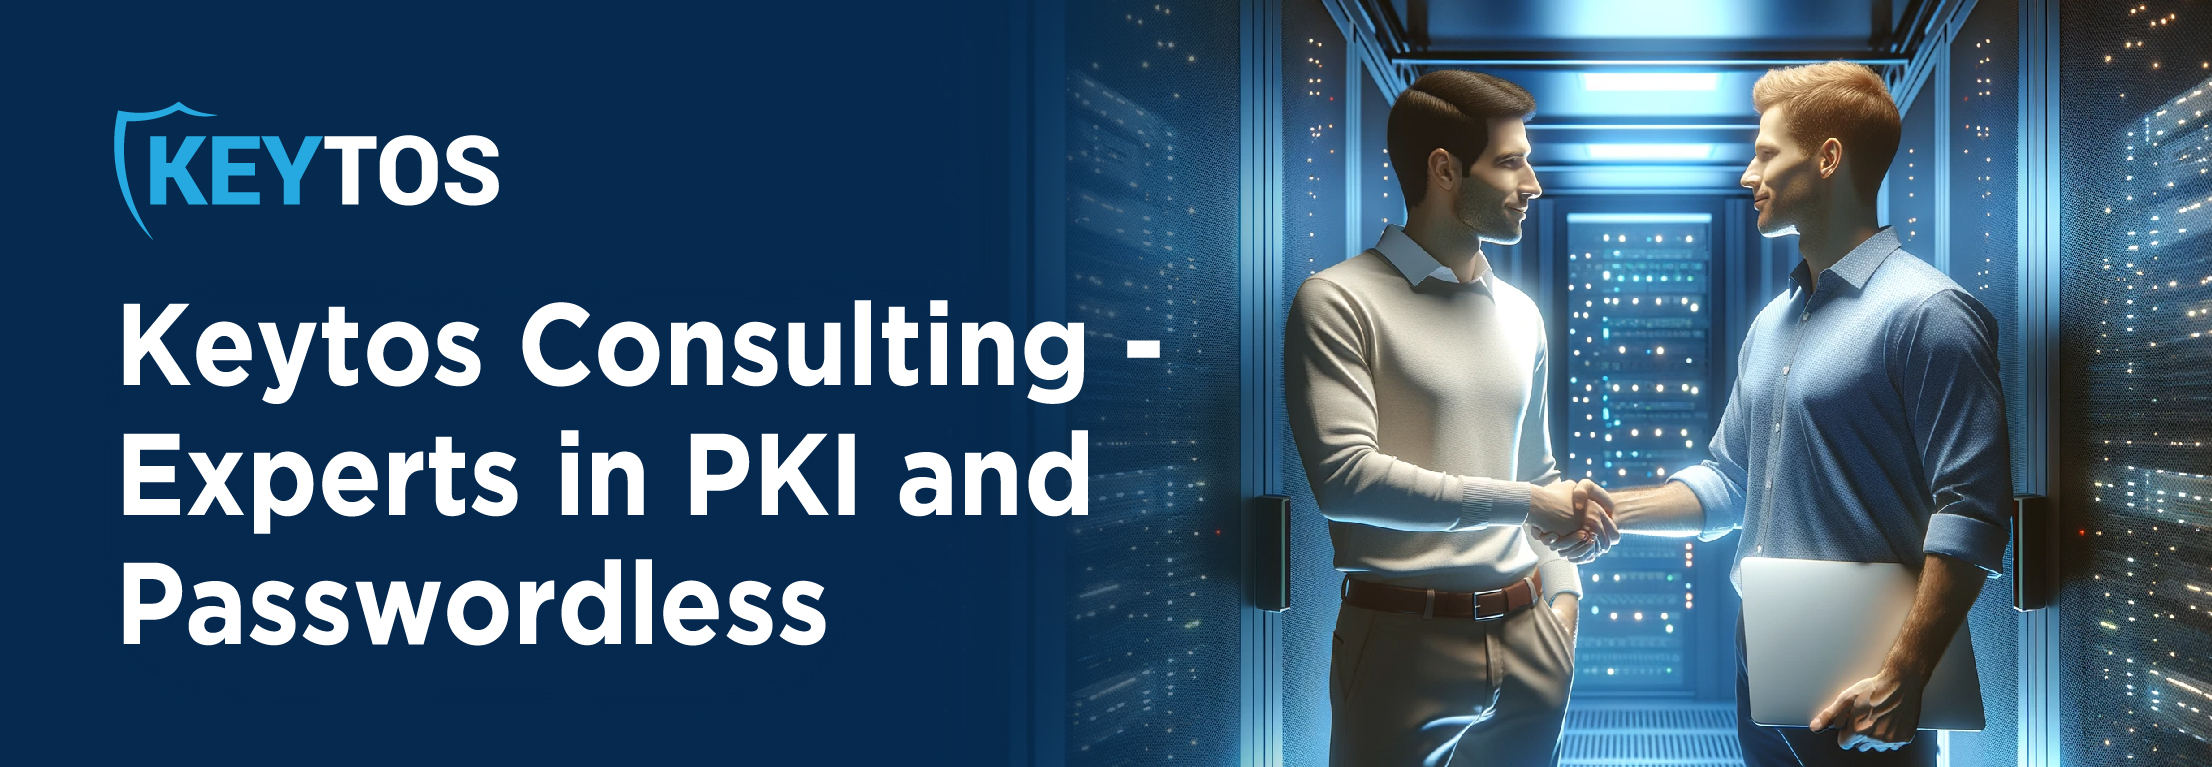 Best PKI Consultants for The Modern Enterprise and Passwordless Authentication Built by ex-Microsoft Cloud PKI Engineers